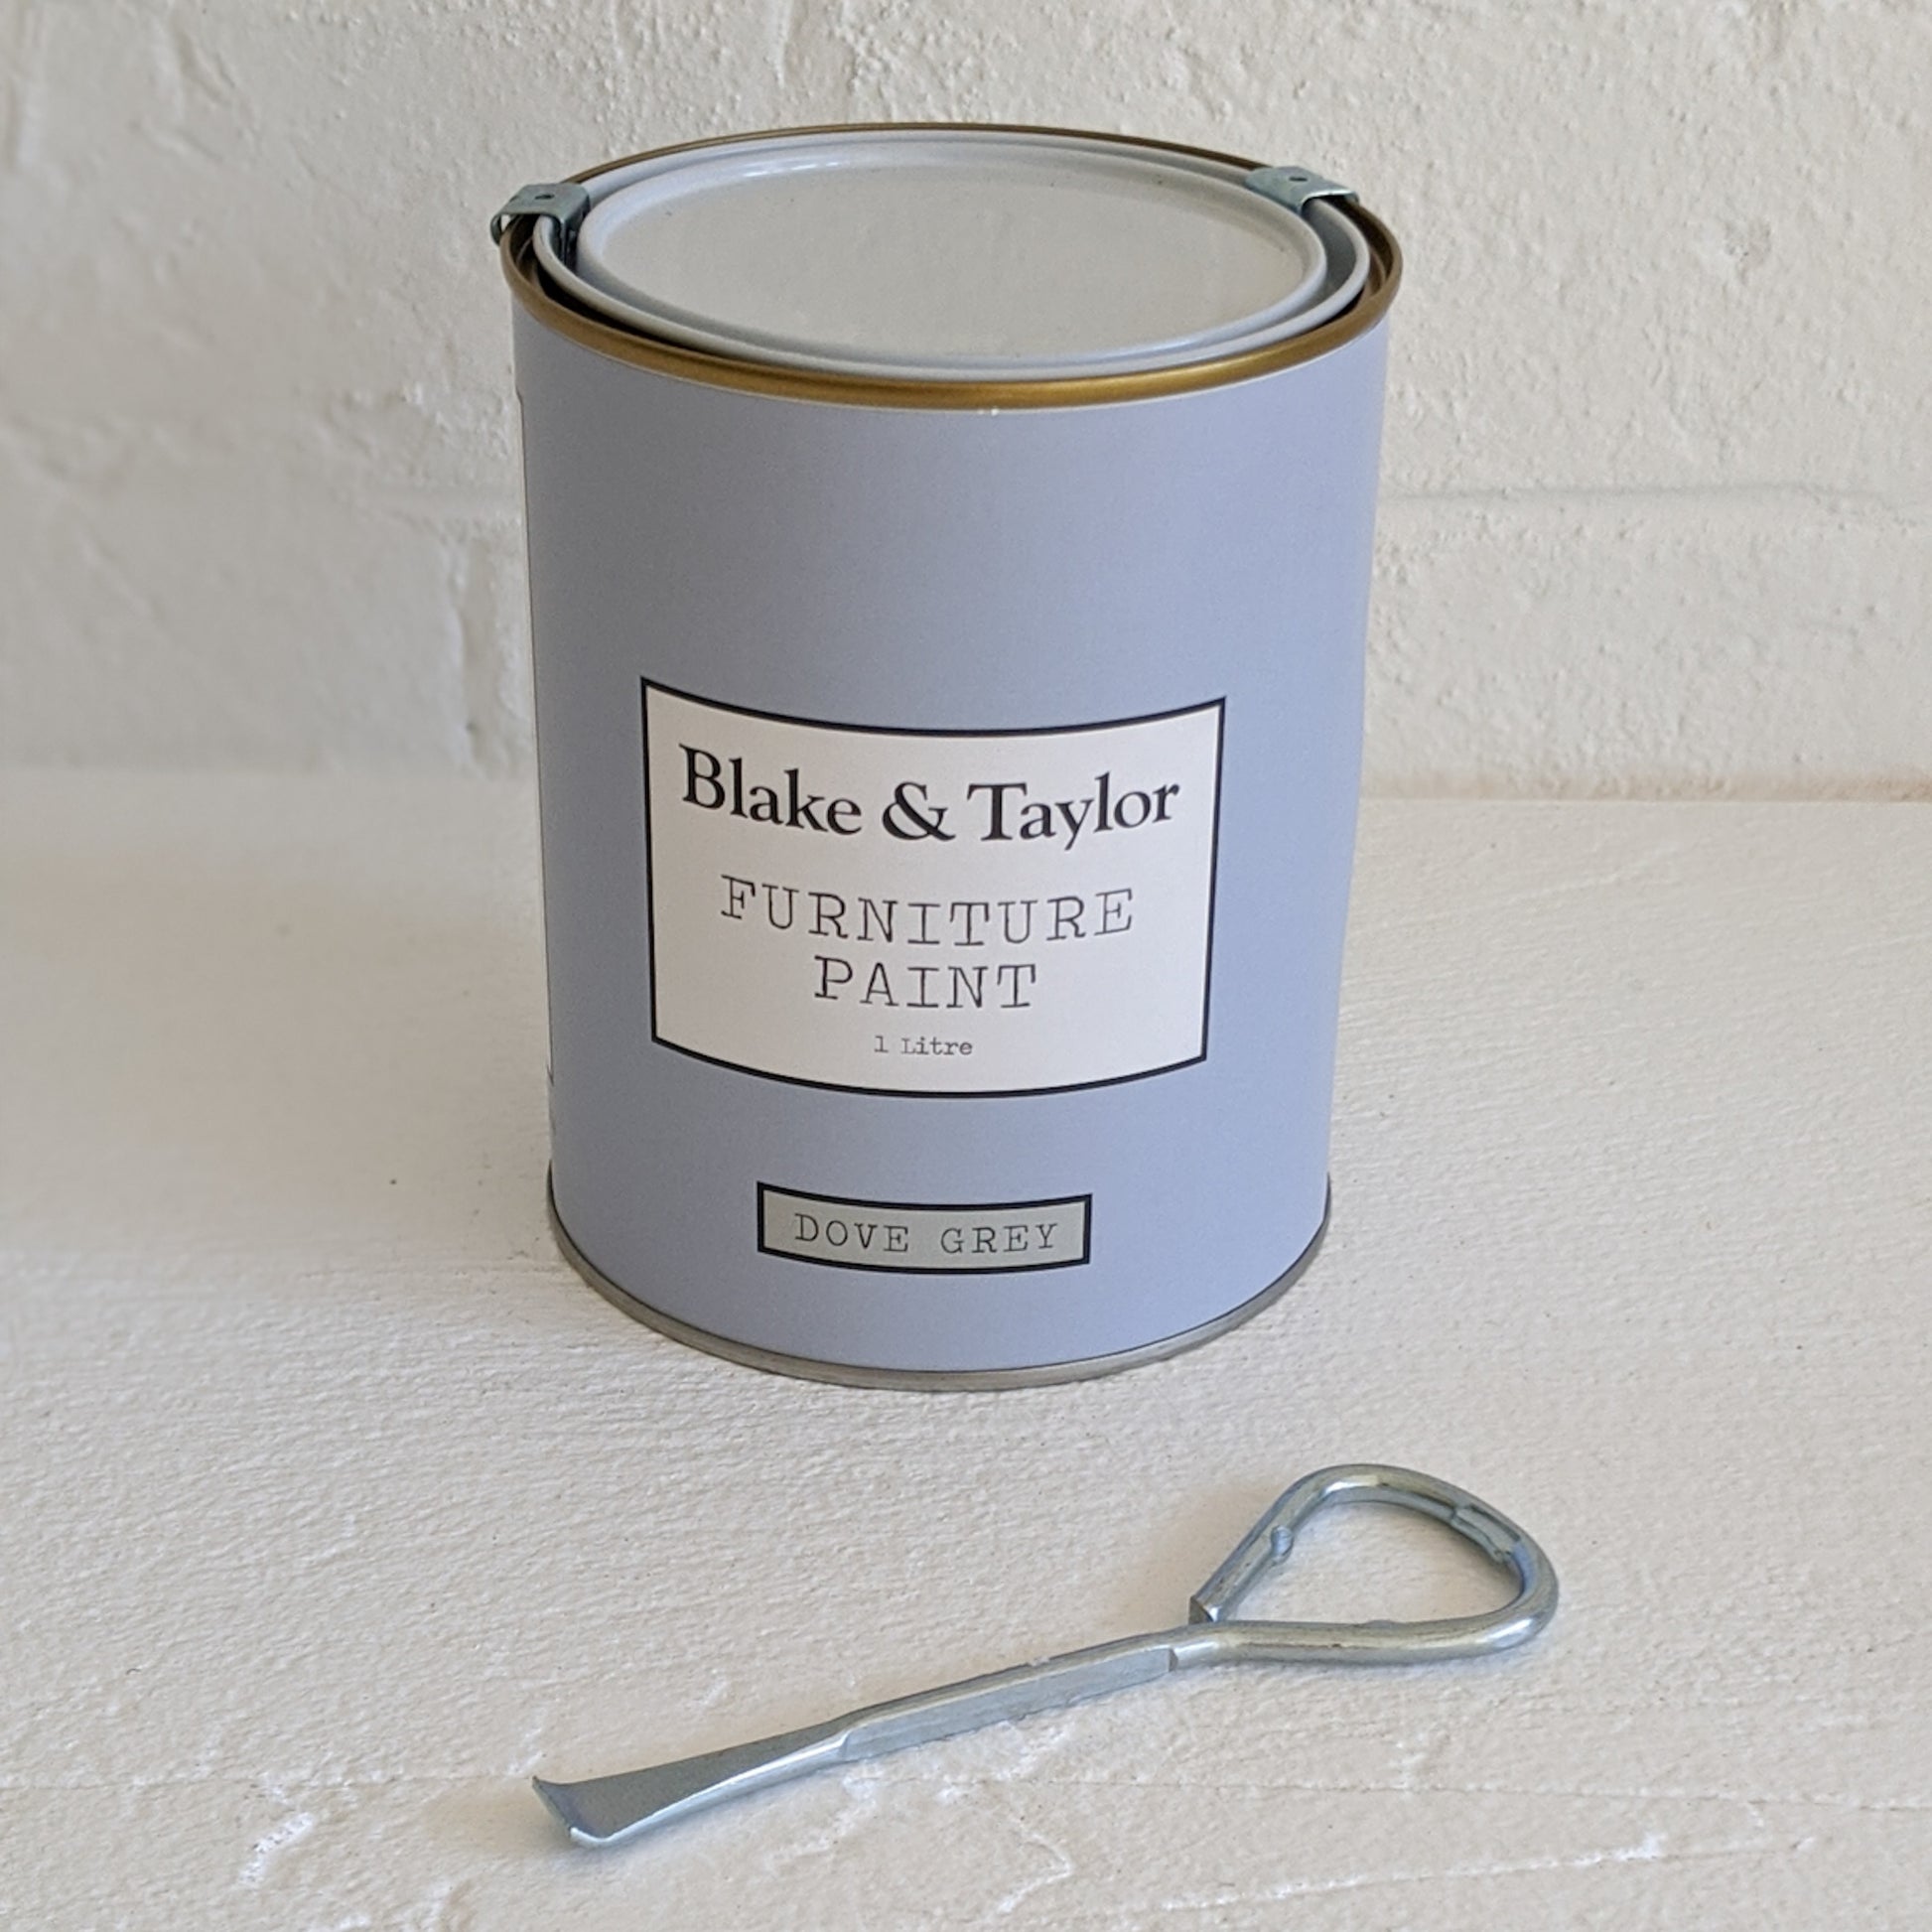 1 litre of Blake & Taylor Chalk Furniture Paint with a metal paint can opener